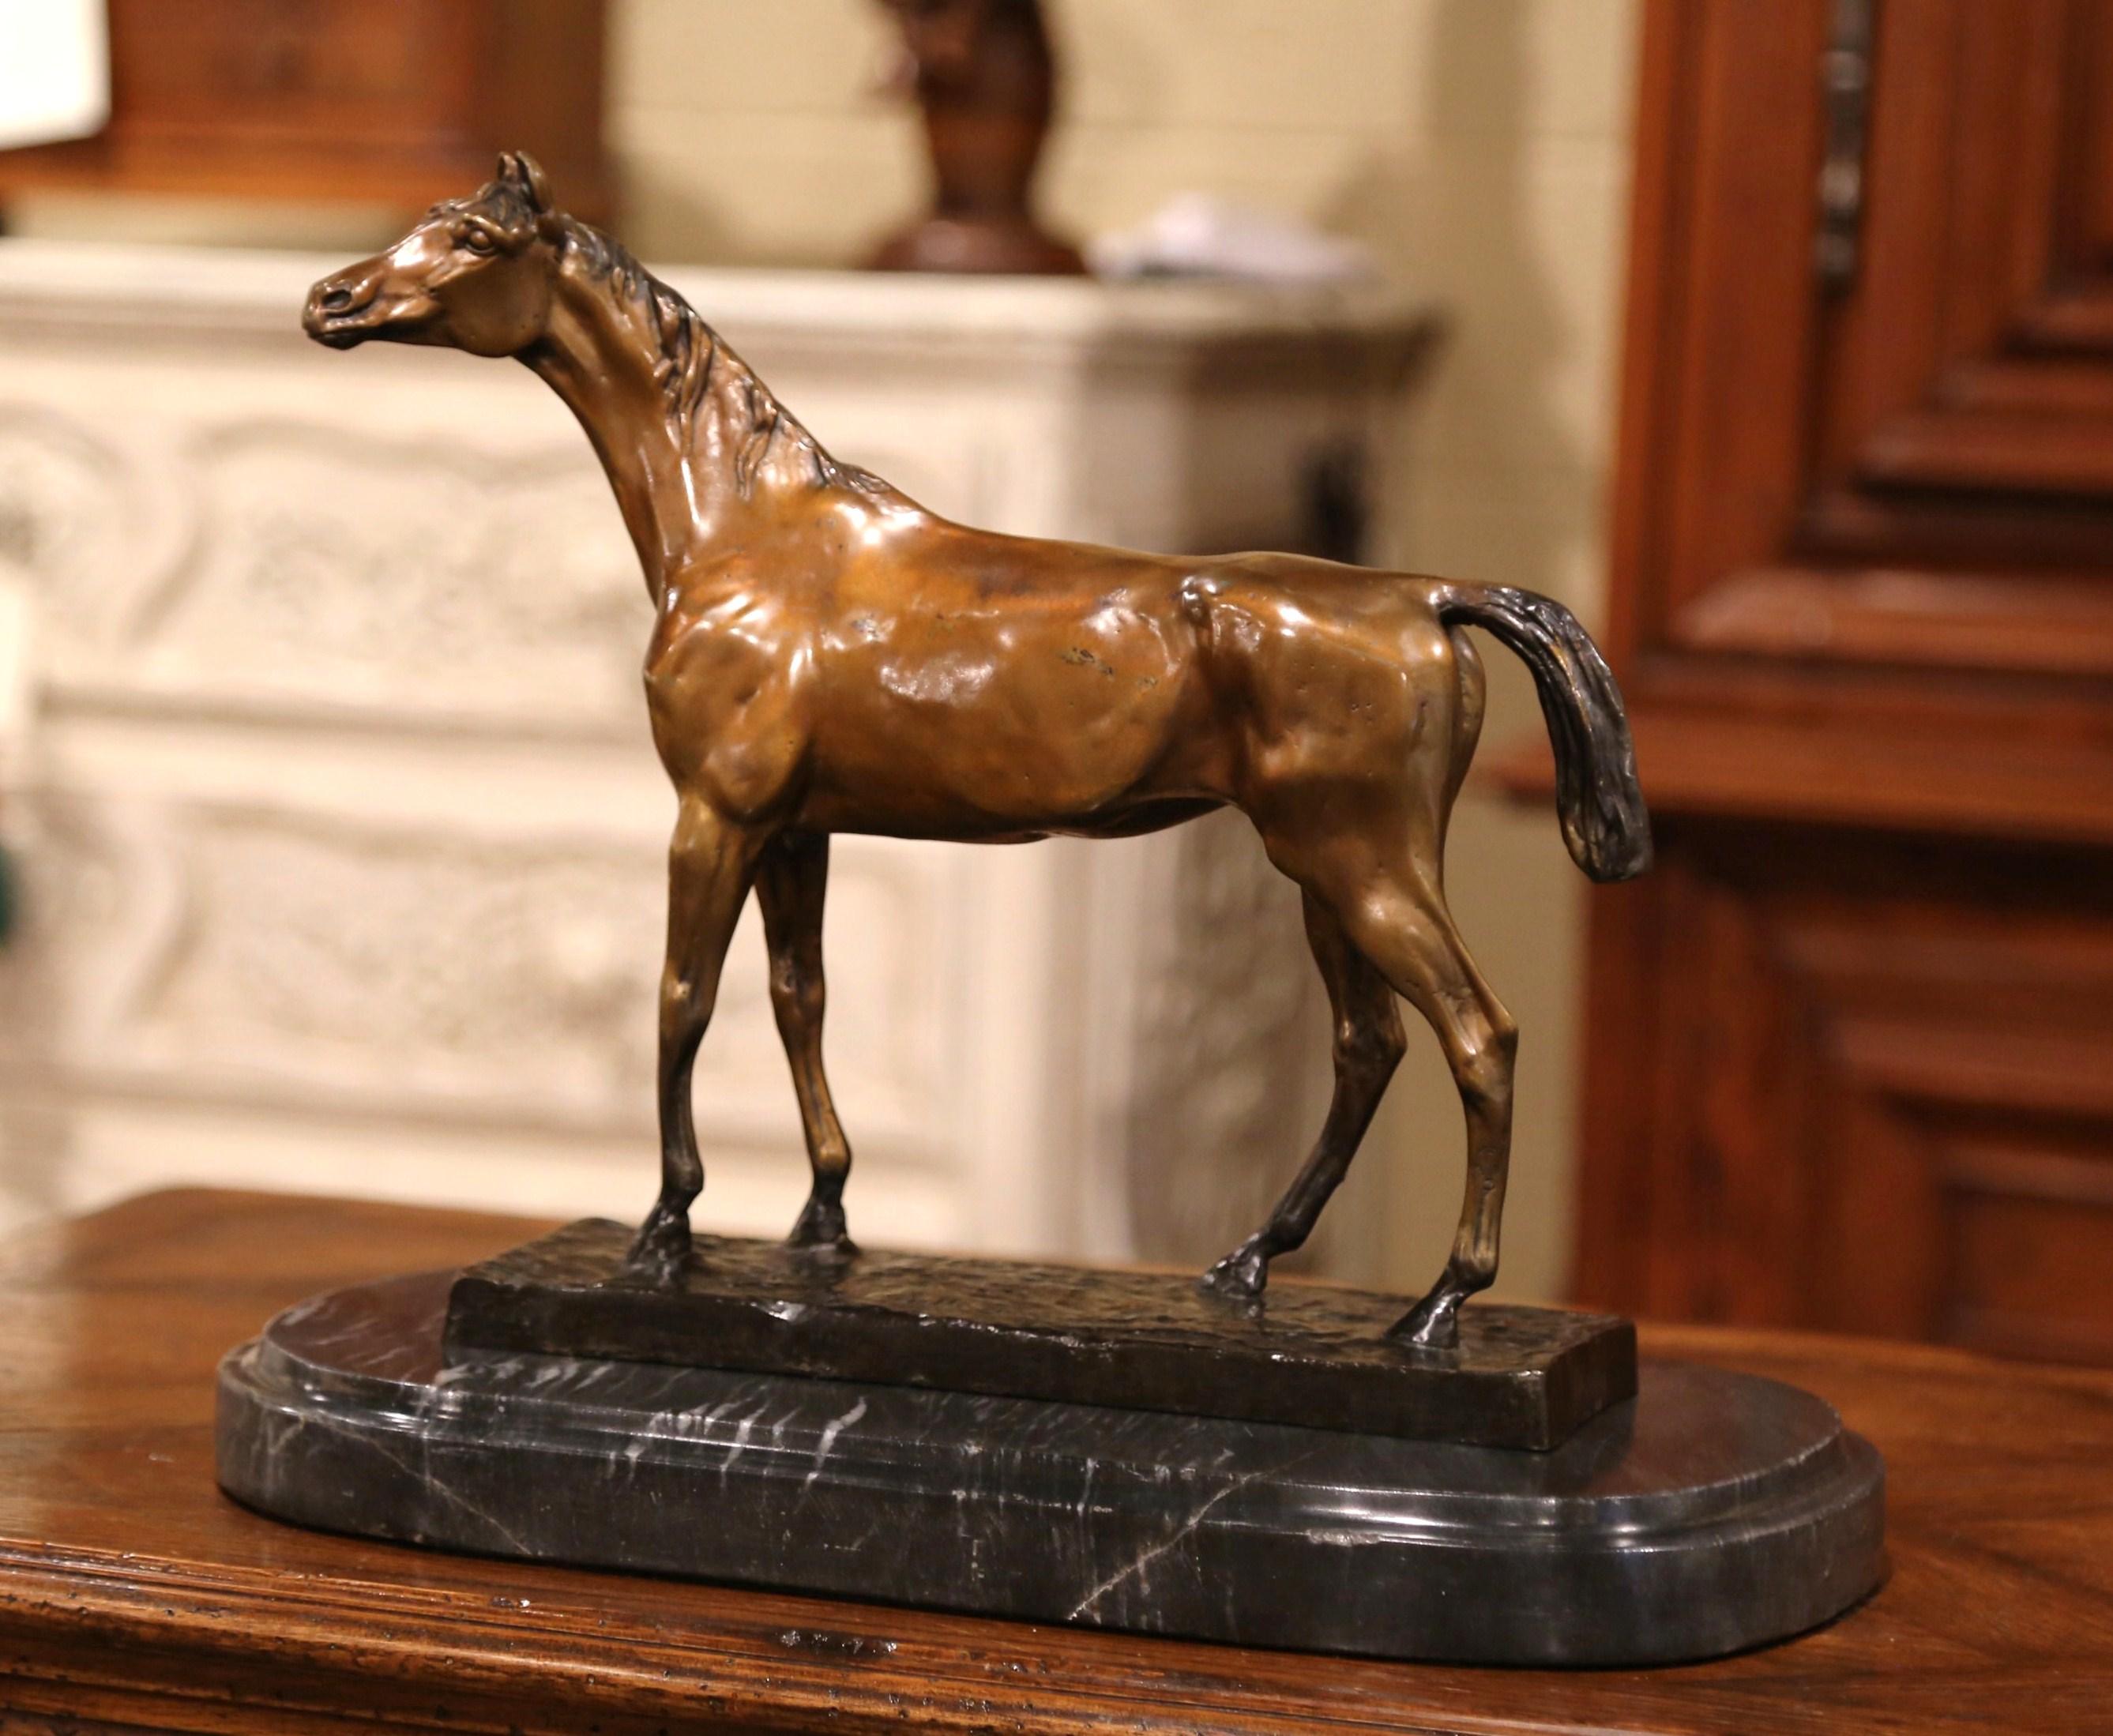 Decorate a man's office or library shelf with this elegant bronze horse sculpture, created in France circa 1950, the sculpture is highly detailed depicting a race horse standing on an oval black and grey marble base. The piece is in excellent